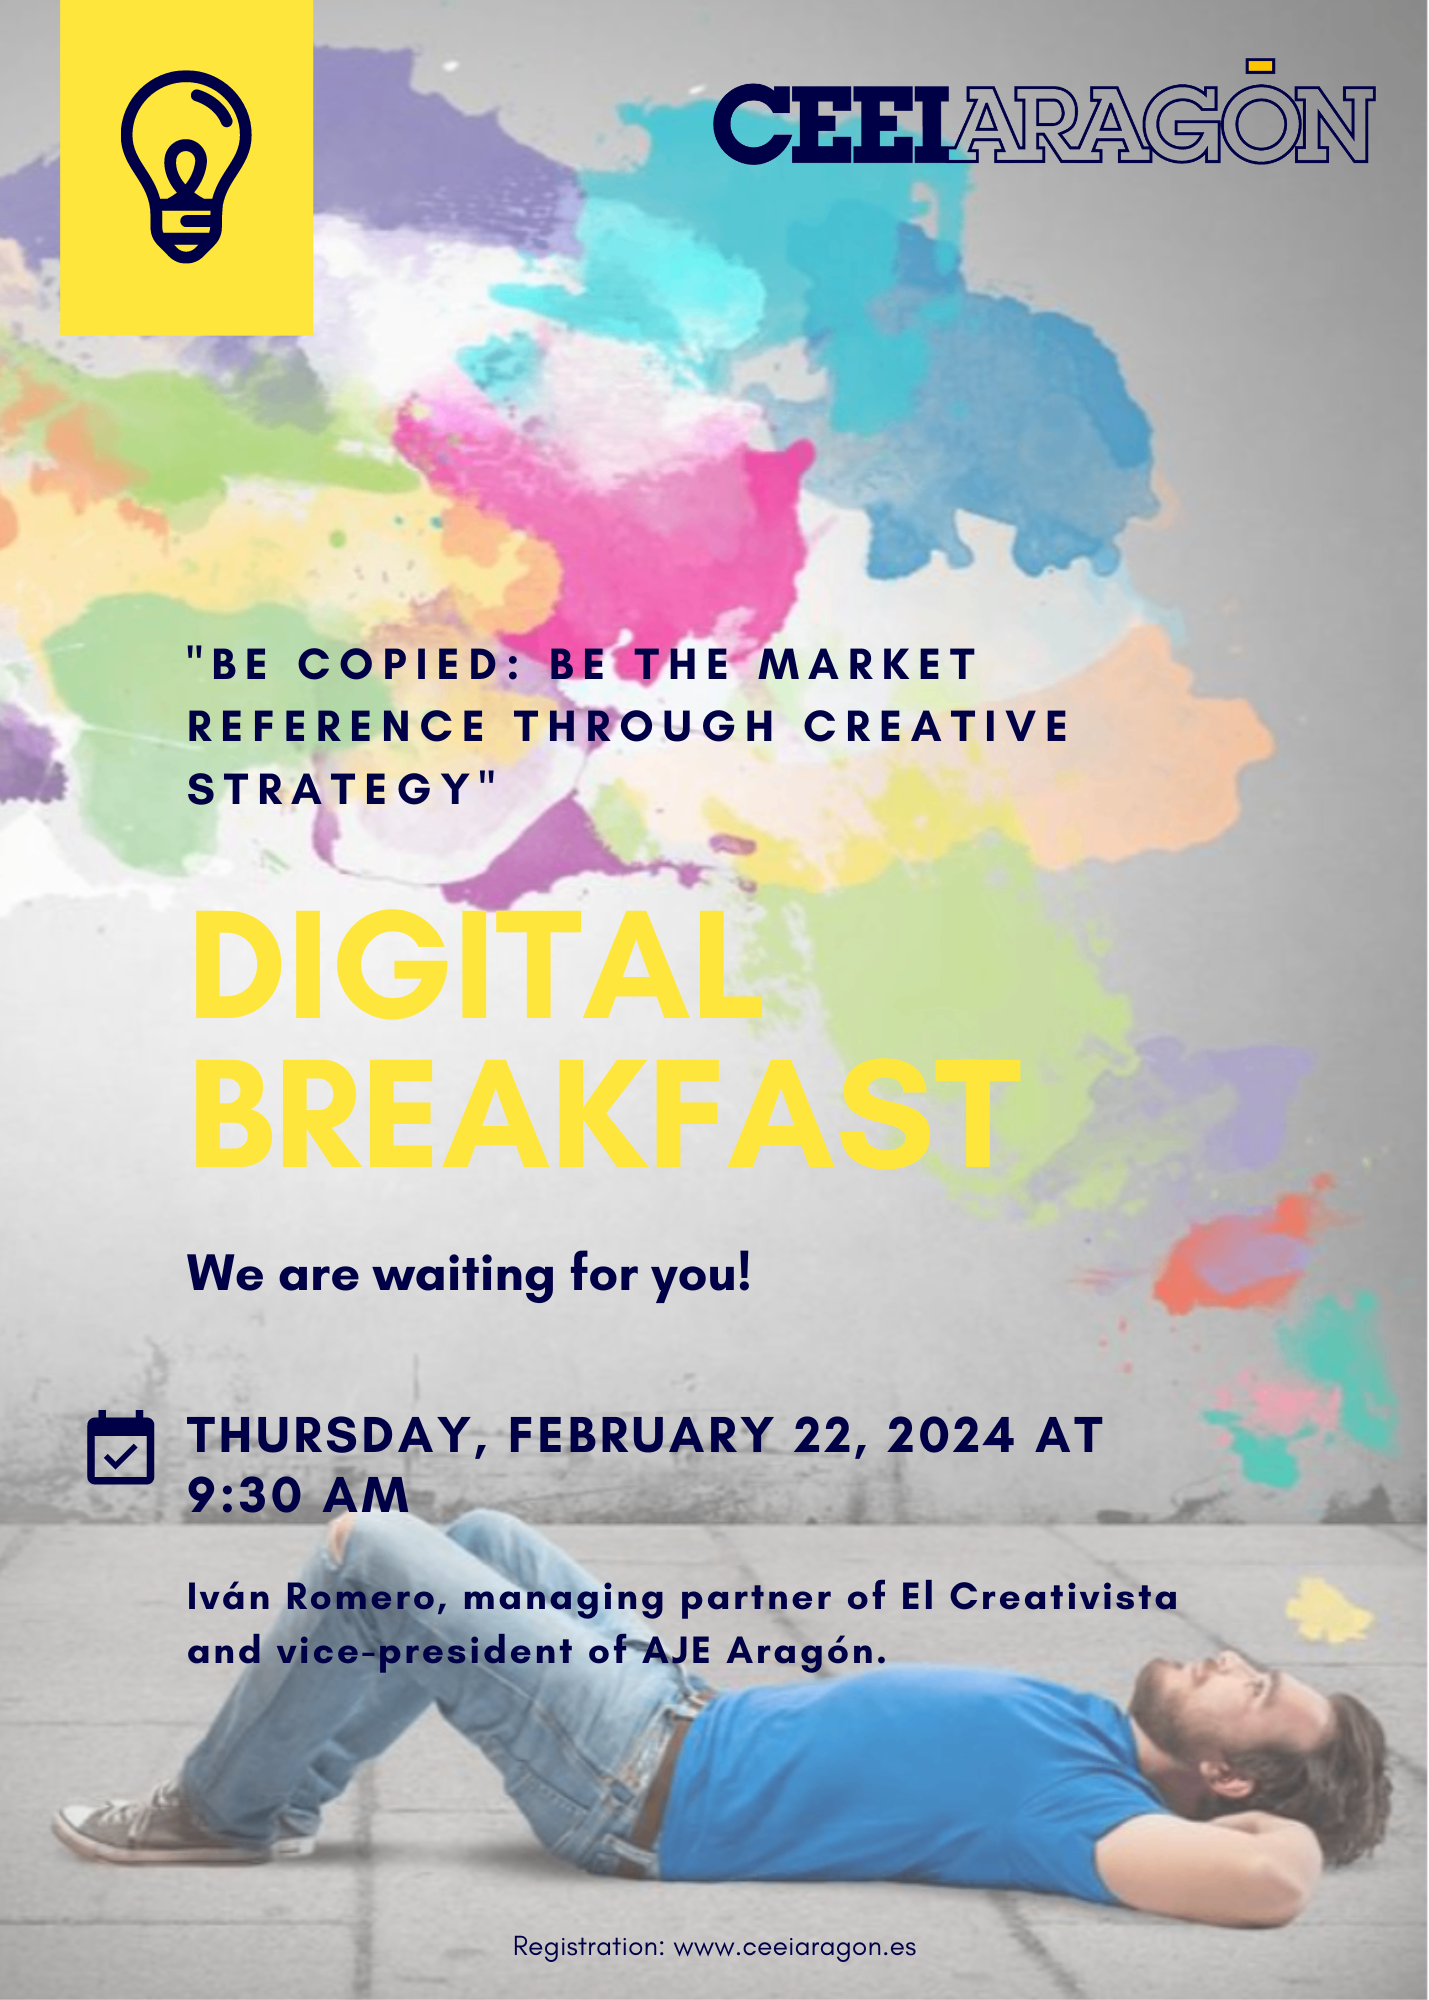 Digital Breakfast CEEI “Be the reference in the market through creative strategy”